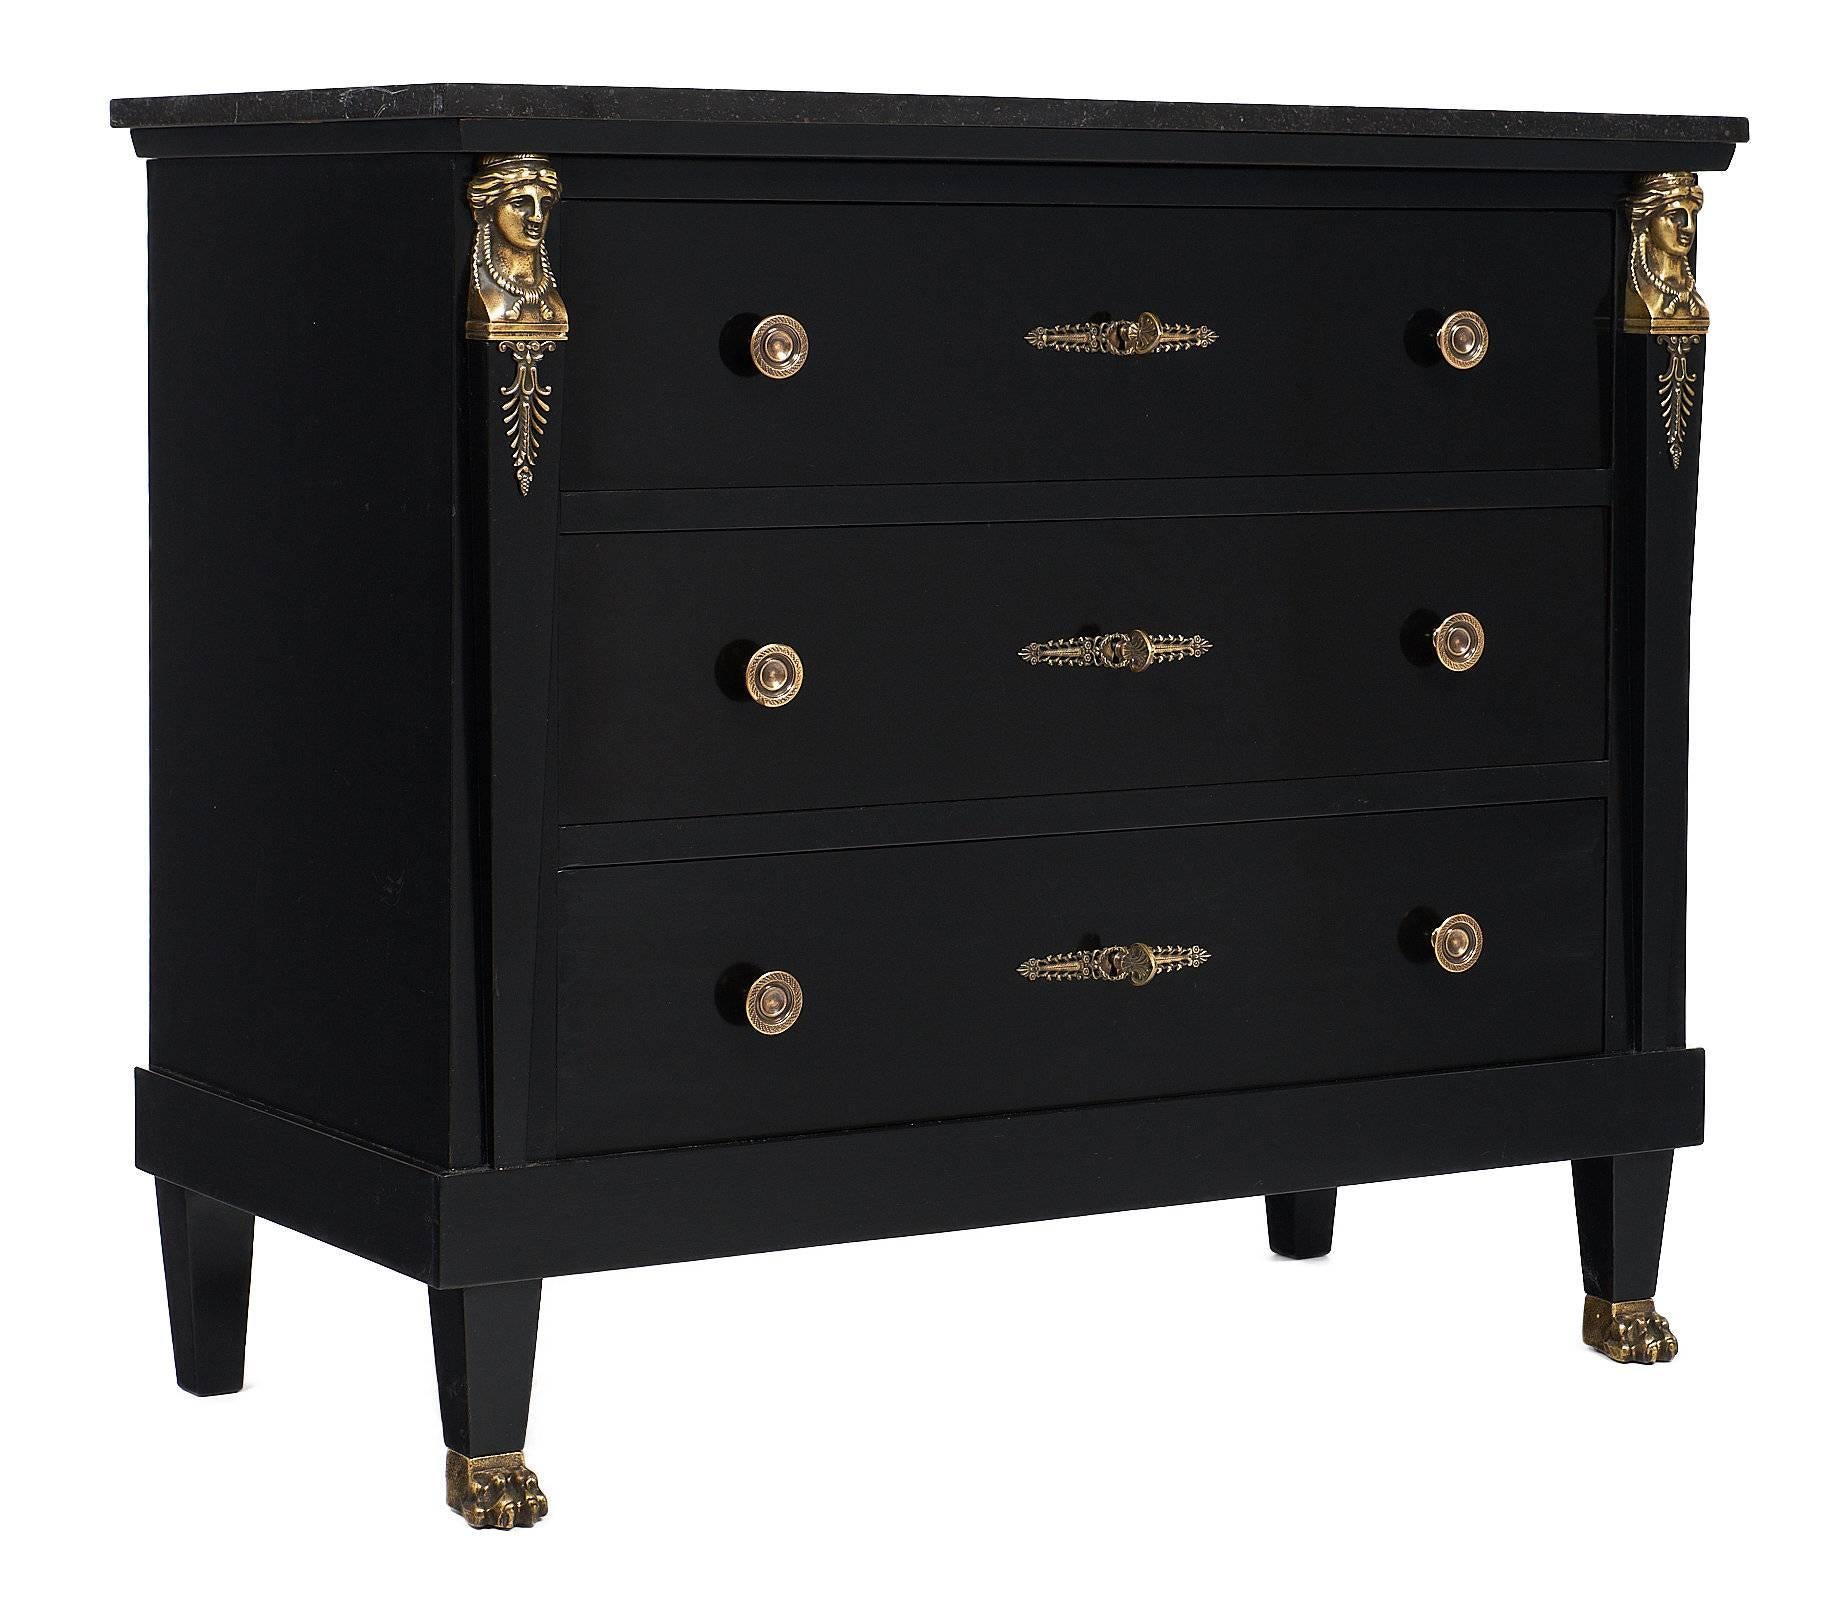 Late 19th Century Black Marble-Topped Empire Style Chest